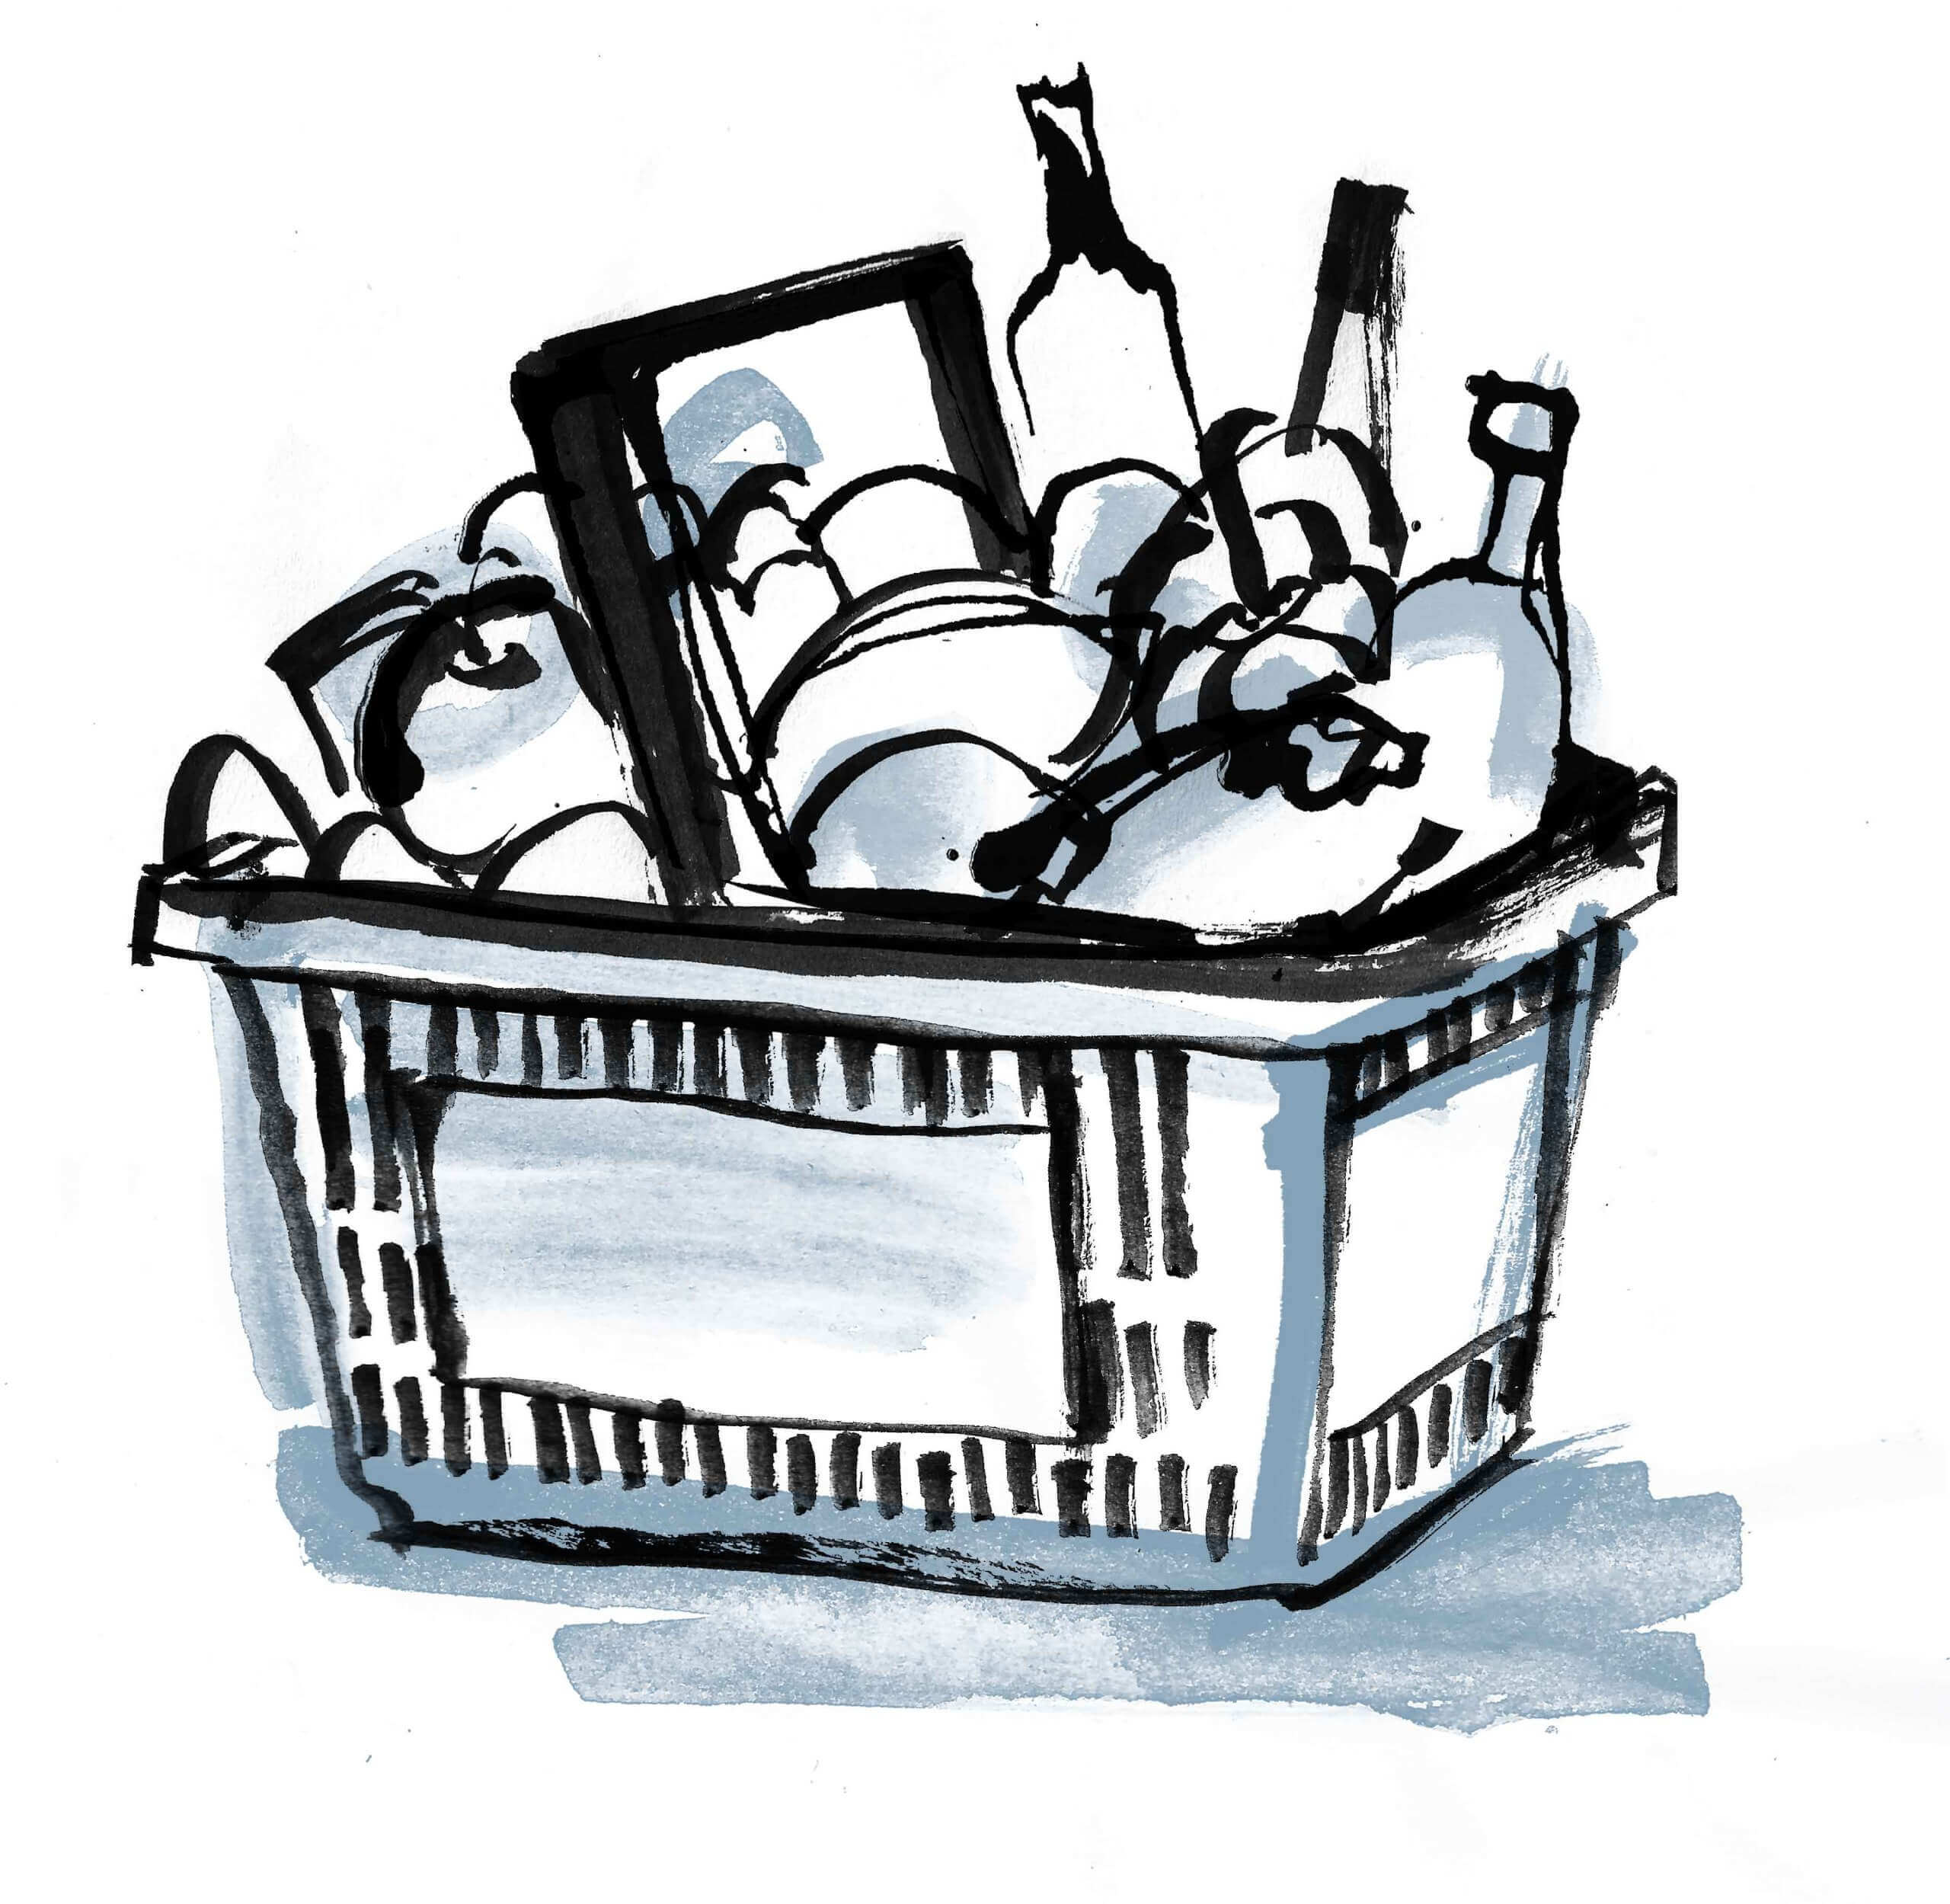 Illustration of a basket of food groceries.Food illustration. Energetic line work, ink and watercolour.